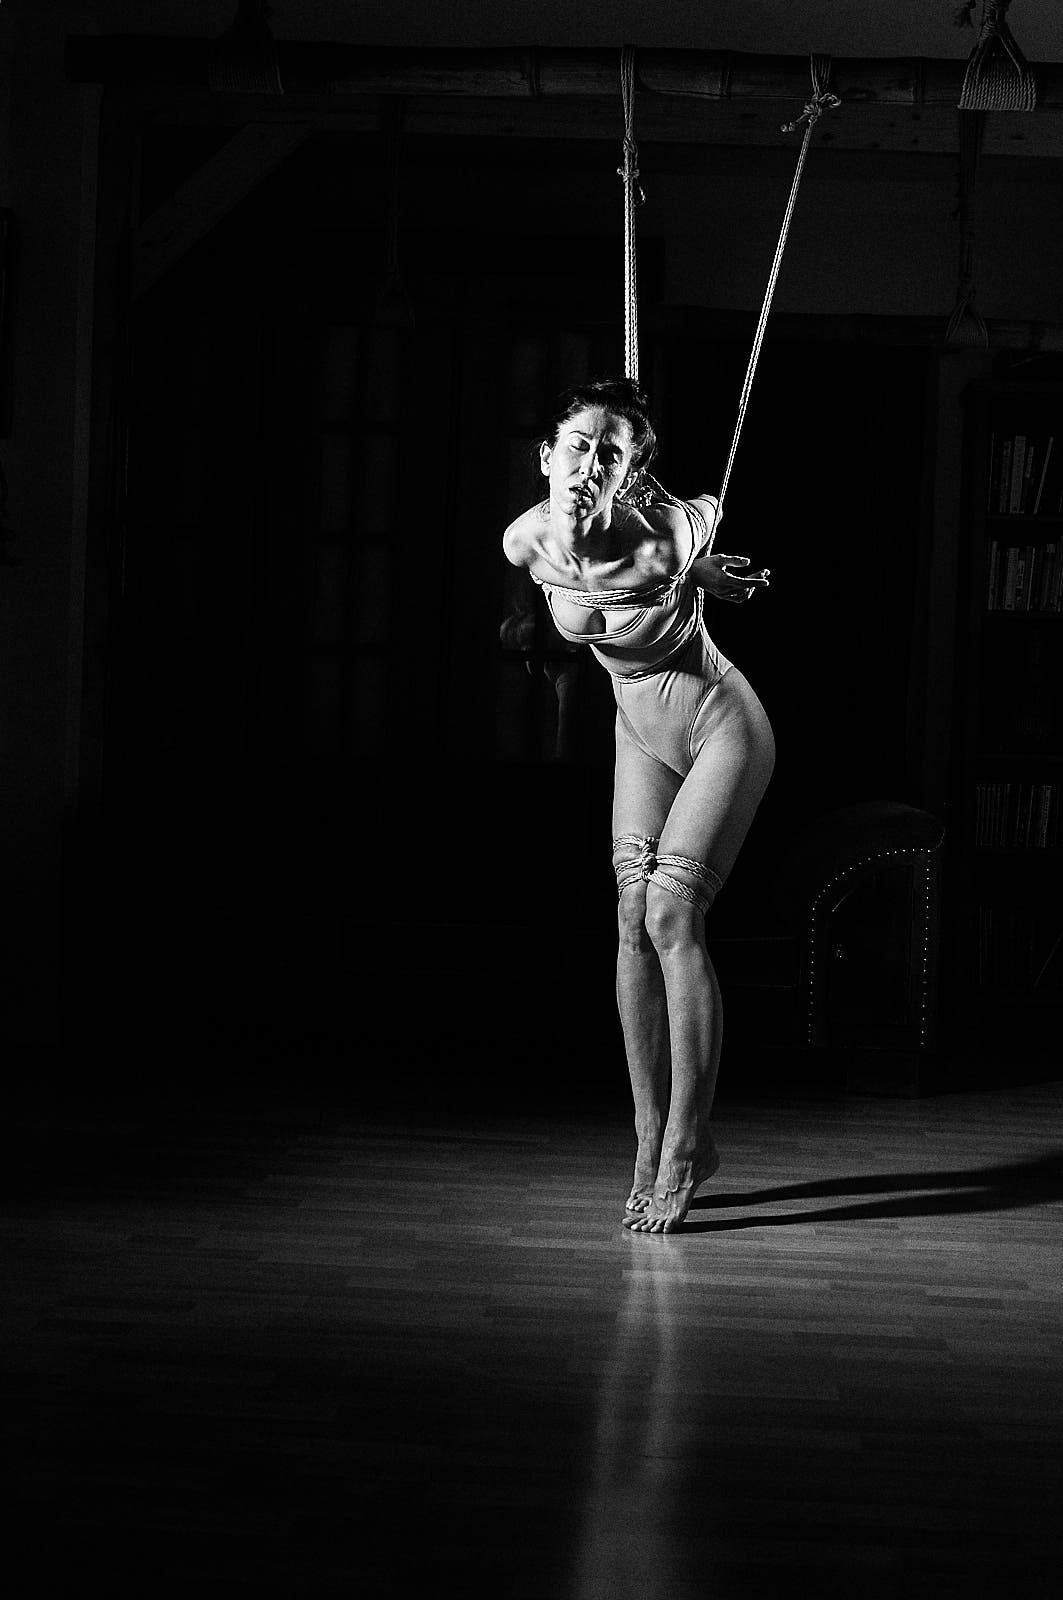 This picture depicts kinbaku photpgraphy in black and white film style. A beautiful woman with long black hair in rope bondage.